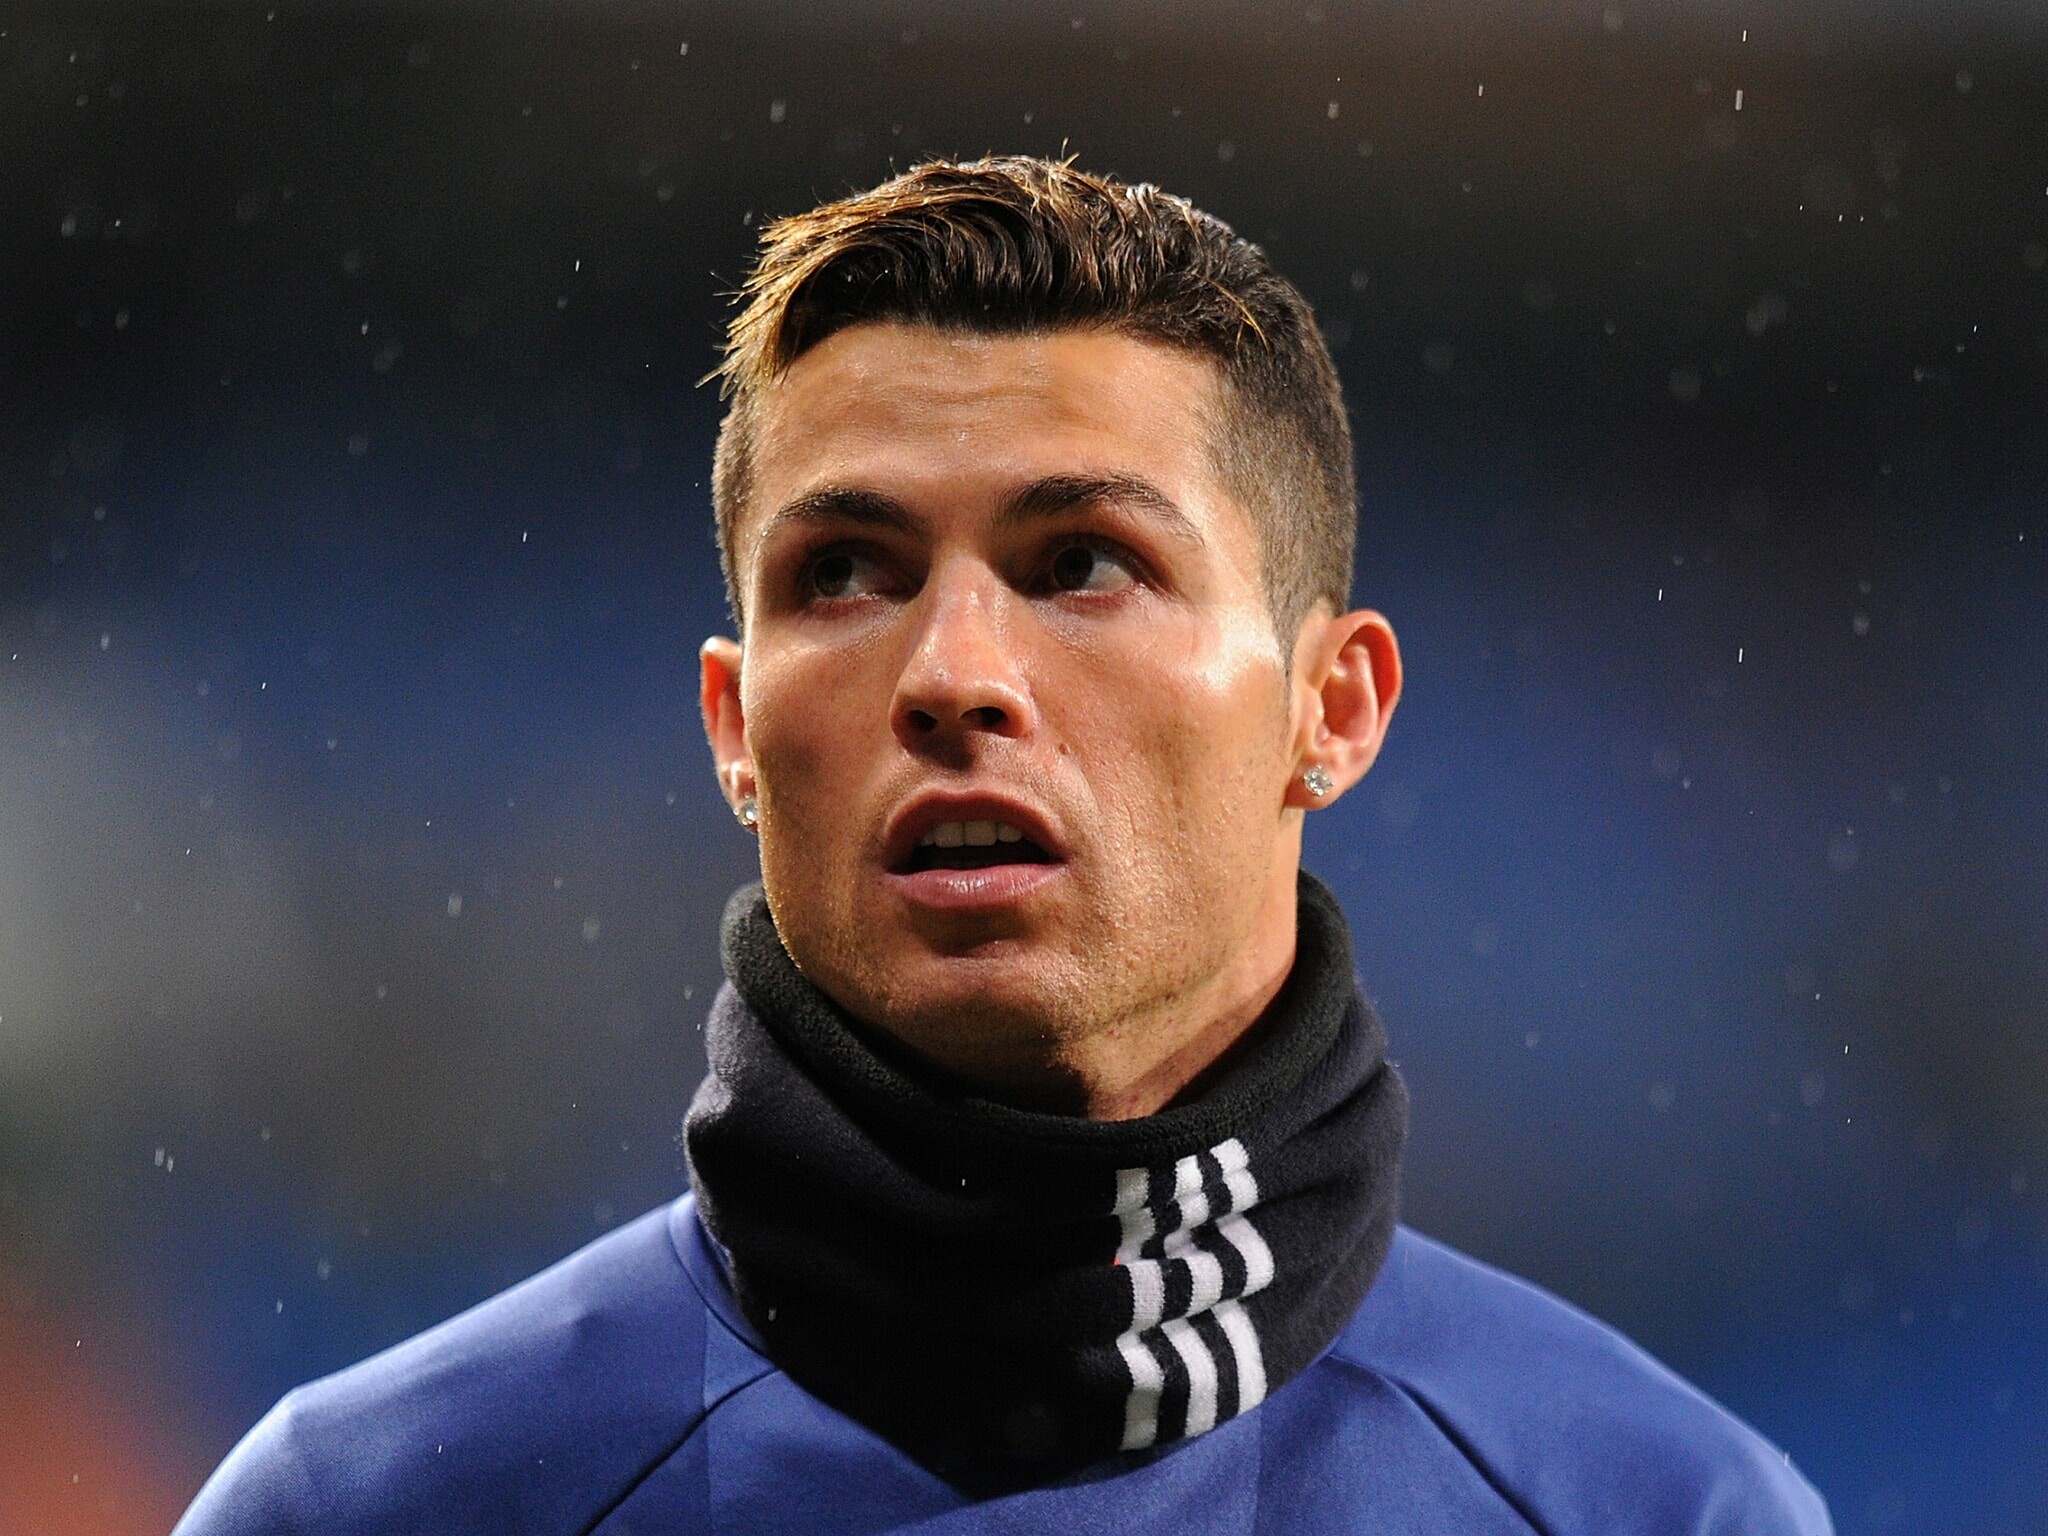 Cristiano Ronaldo, HD wallpapers, High-quality images, Top athlete, 2050x1540 HD Desktop